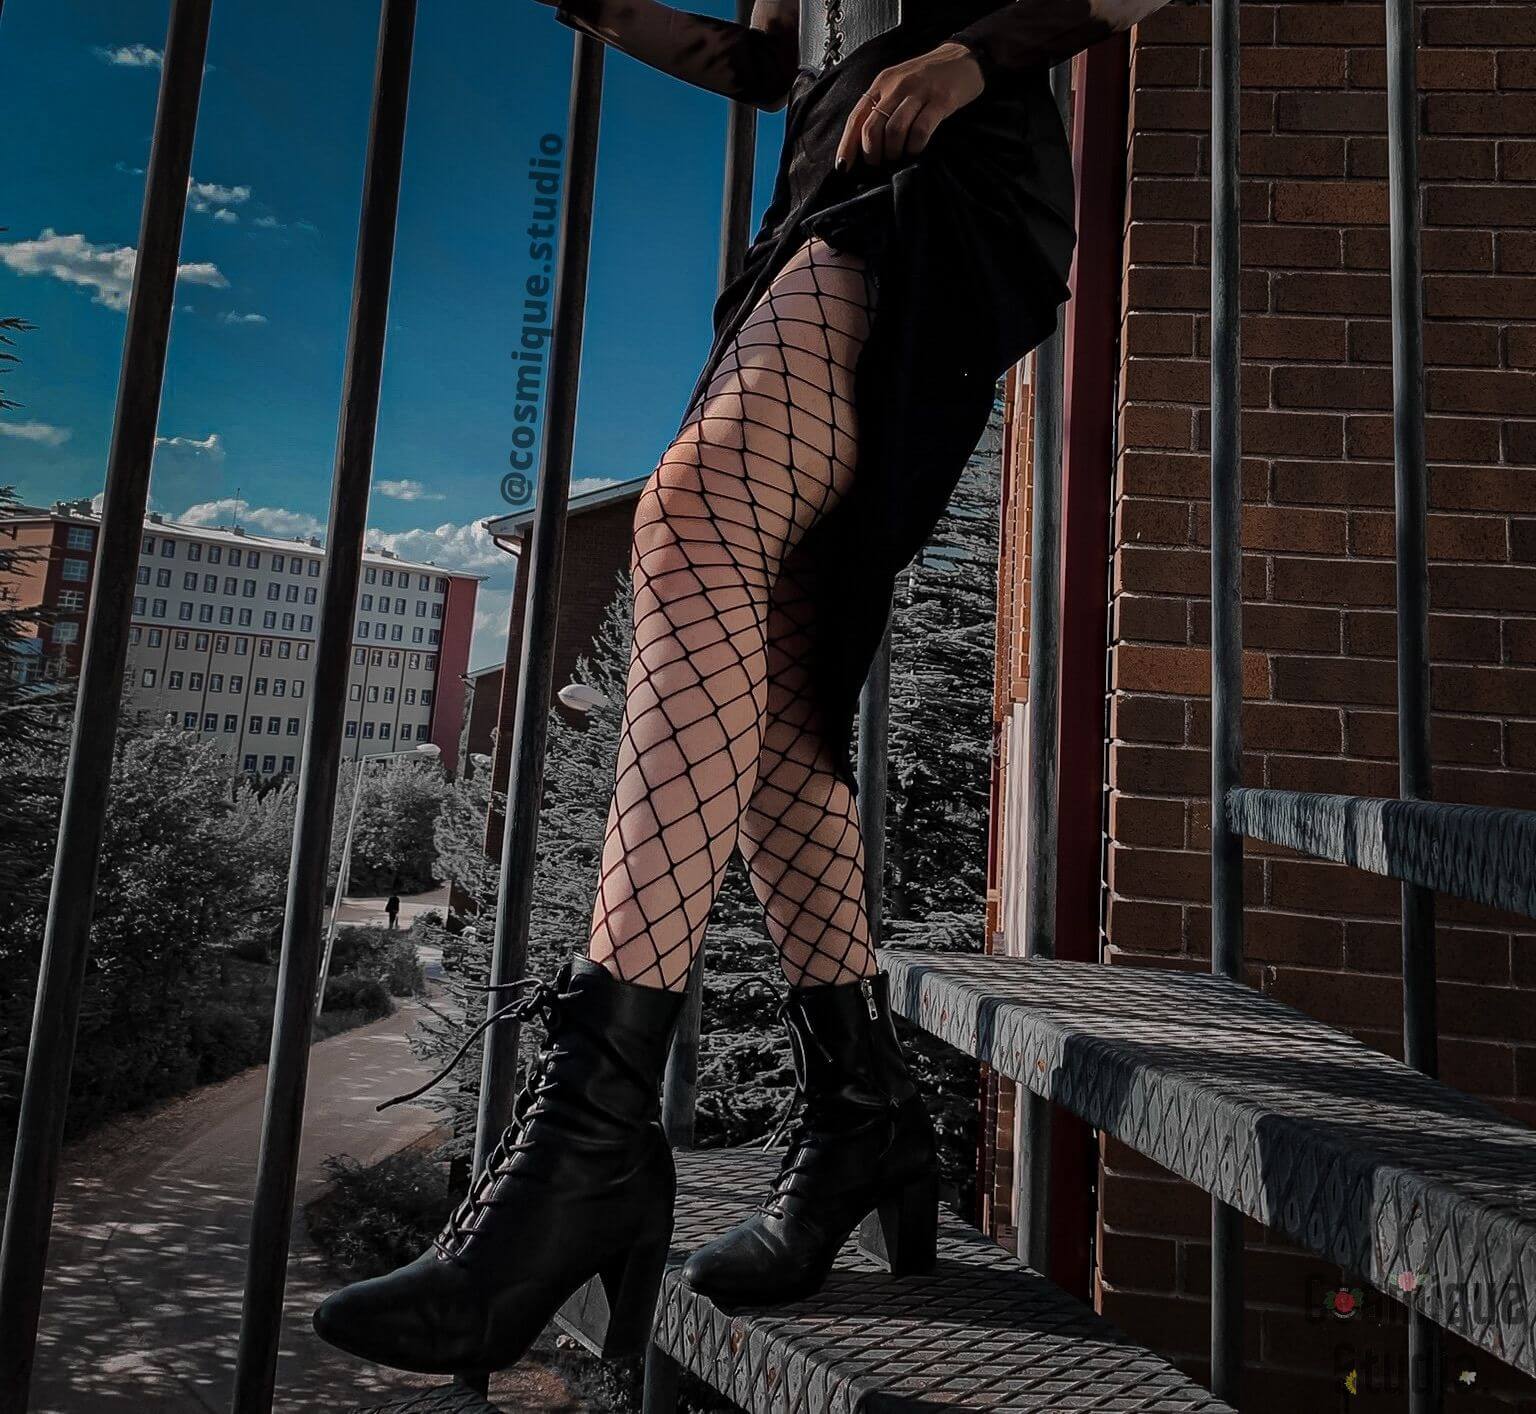 grunge aesthetic on the fire escape thick fishnet stockings under a black midi skirt combined with black leather heels 